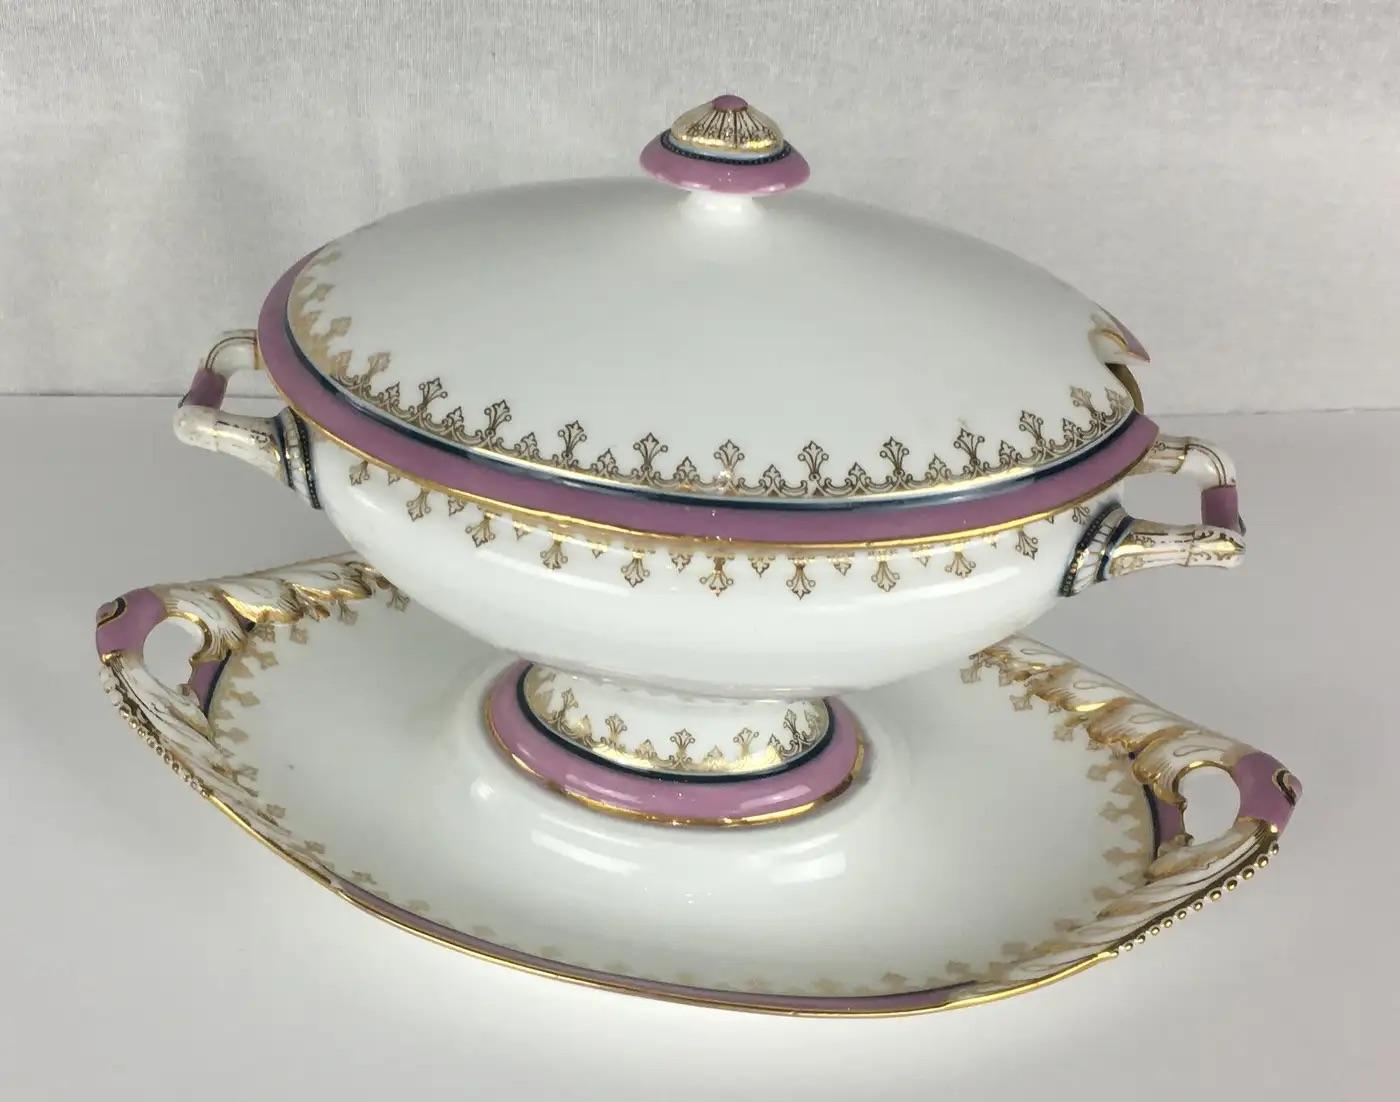 20th Century Set of 6 Limoges Porcelain Serving Dishes, Platters, Bowl and Gravy Boats Set For Sale